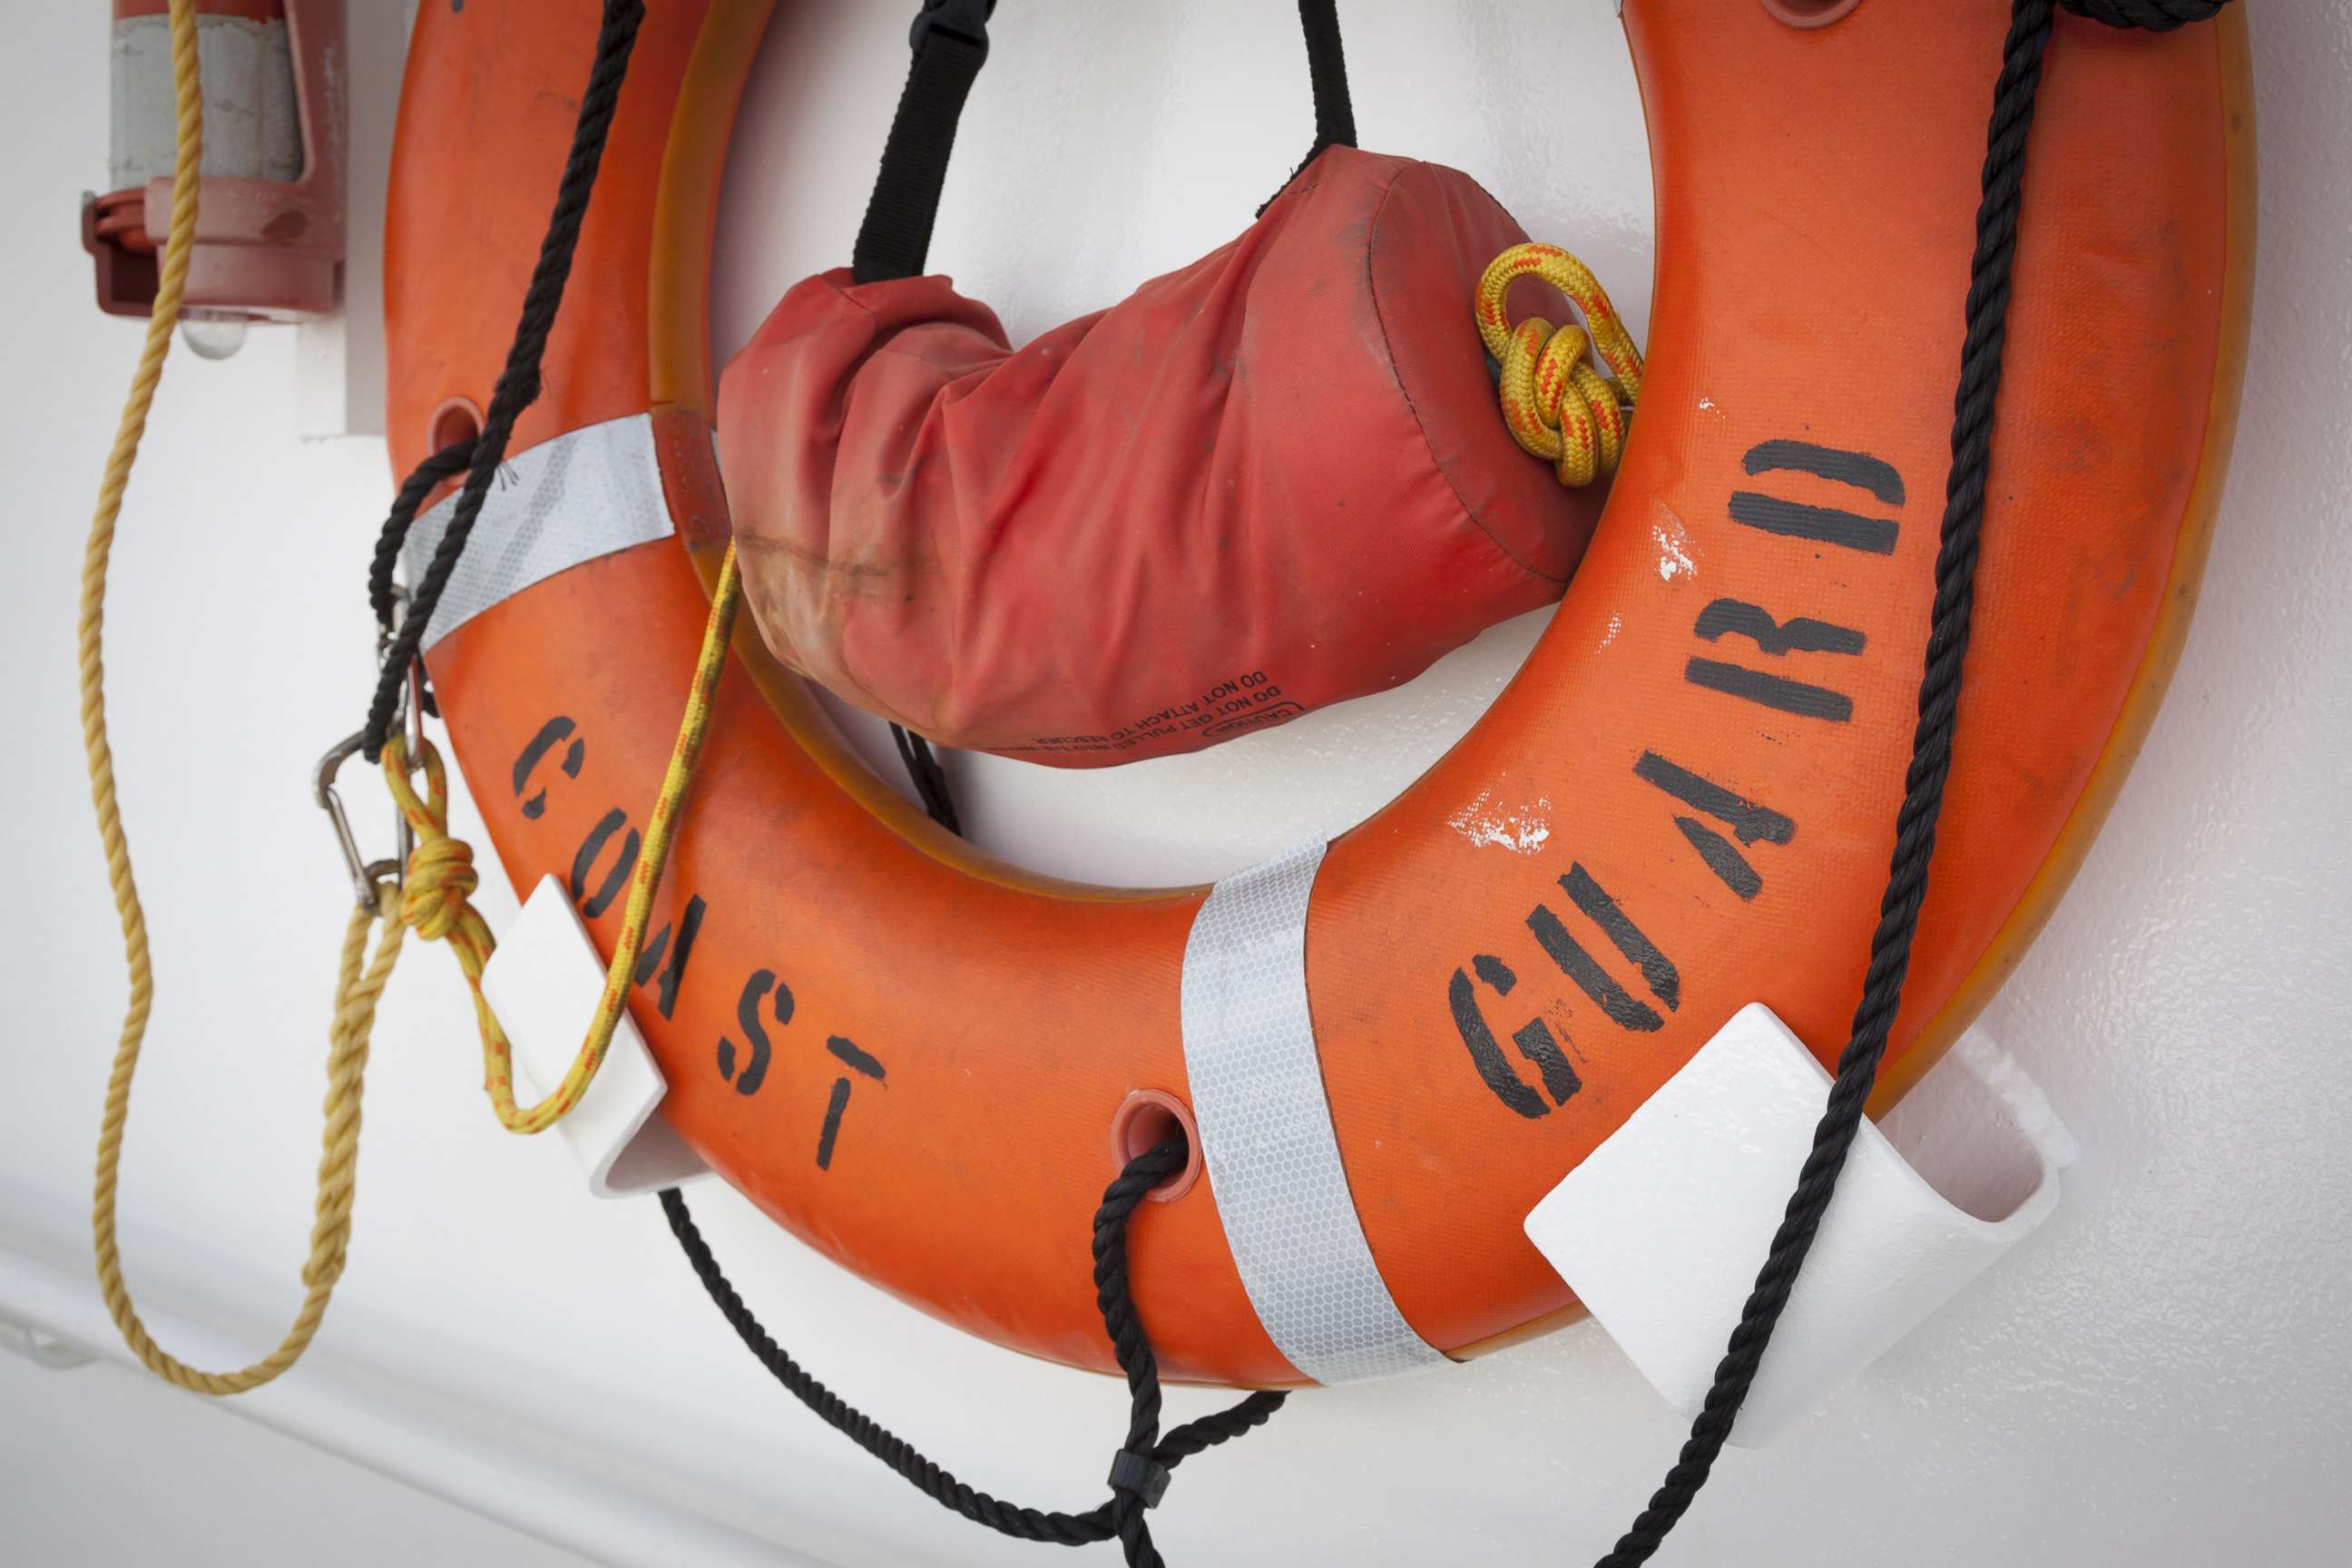 PHOTO: An orange life preserver is mounted to the wall of a United States Coast Guard boat in a stock image, May 24, 2015.